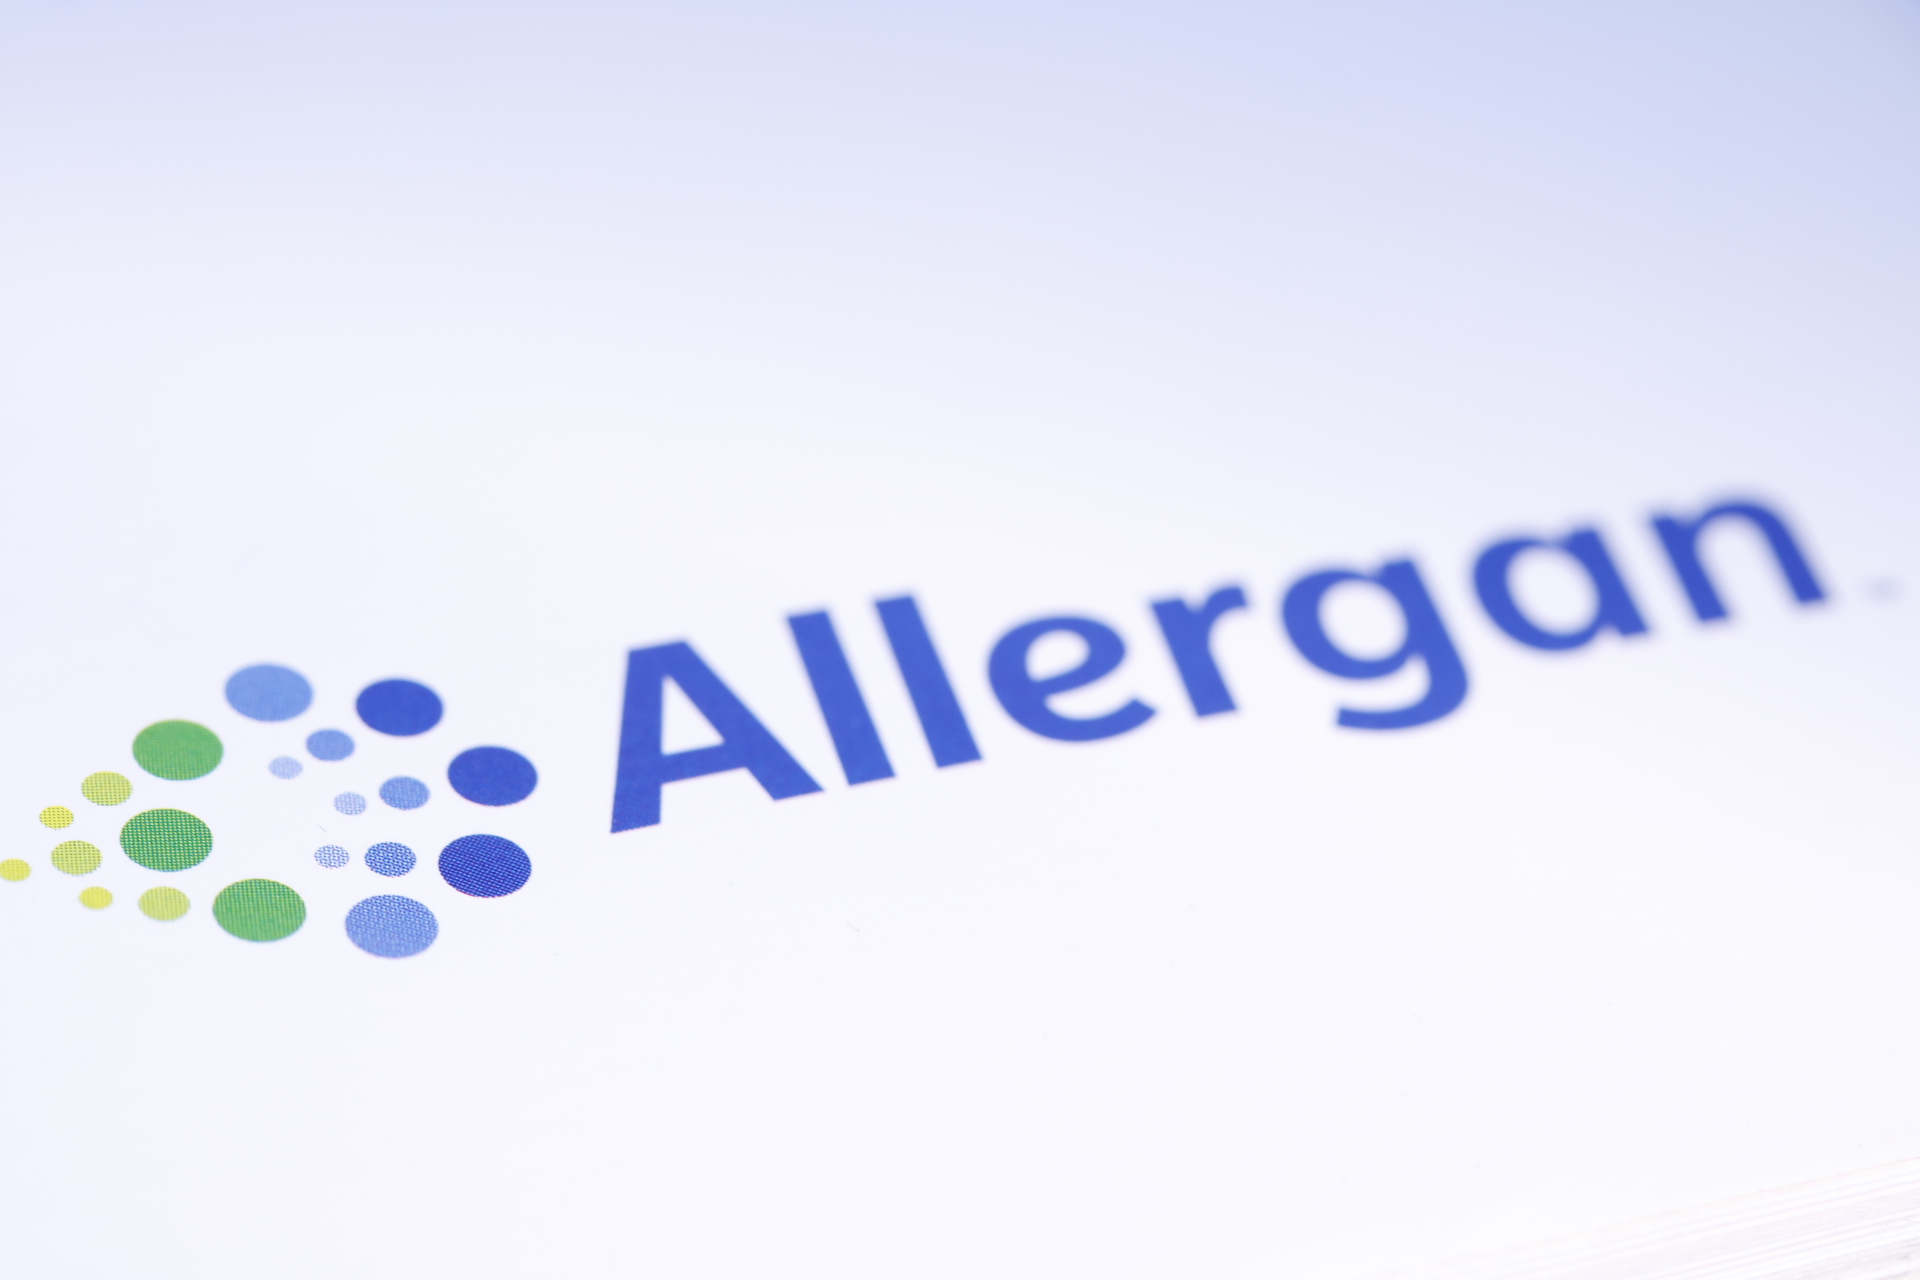 In 2015 Allergan Inc was acquired by Actavis and renamed Allergan plc © dividendhike.com